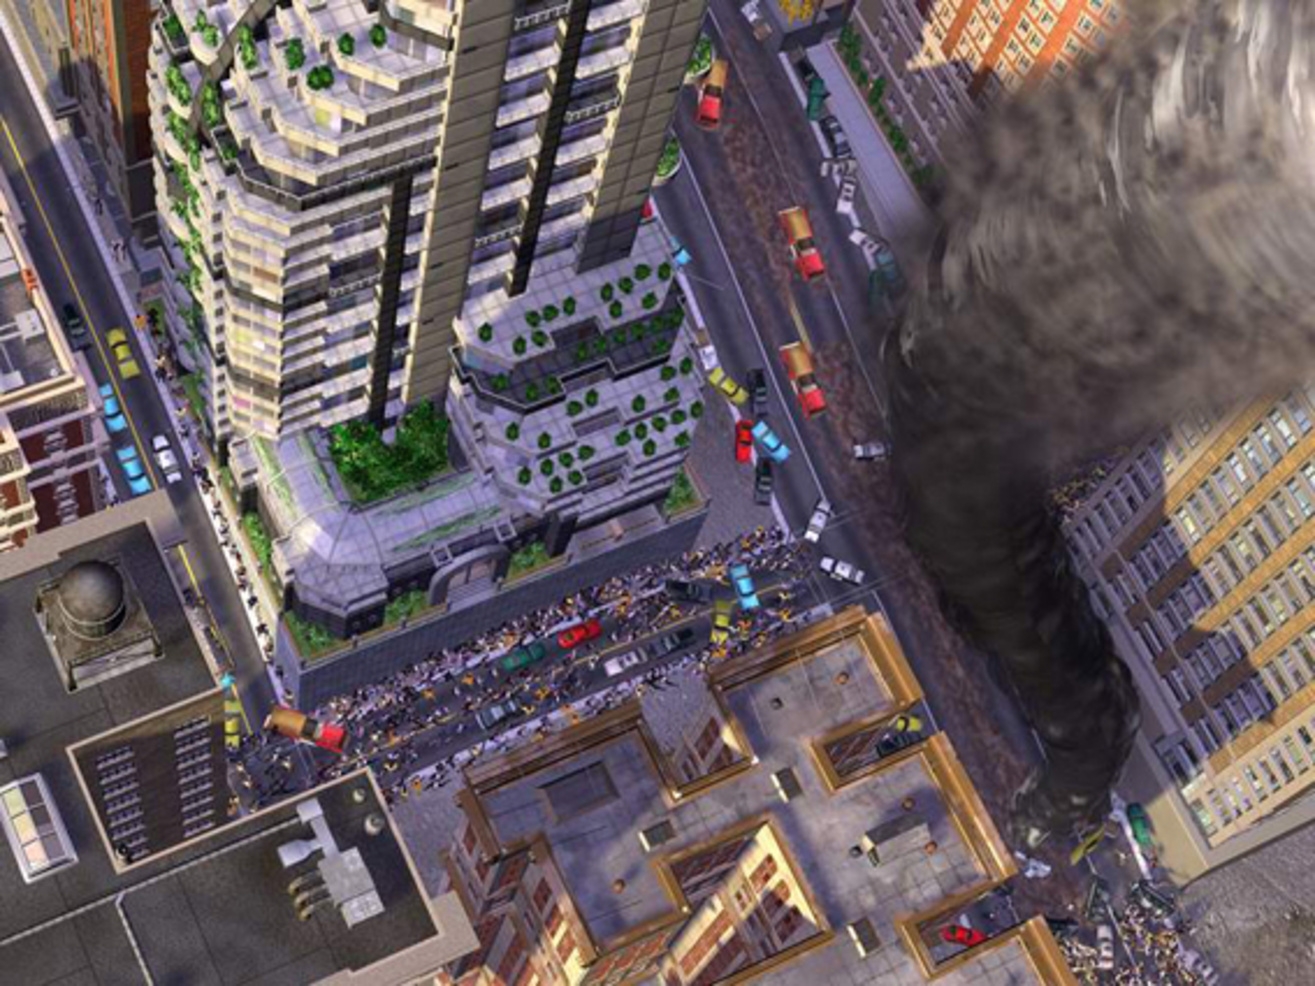 SimCity 4 (PC) / SimCity 4 Deluxe (PC)